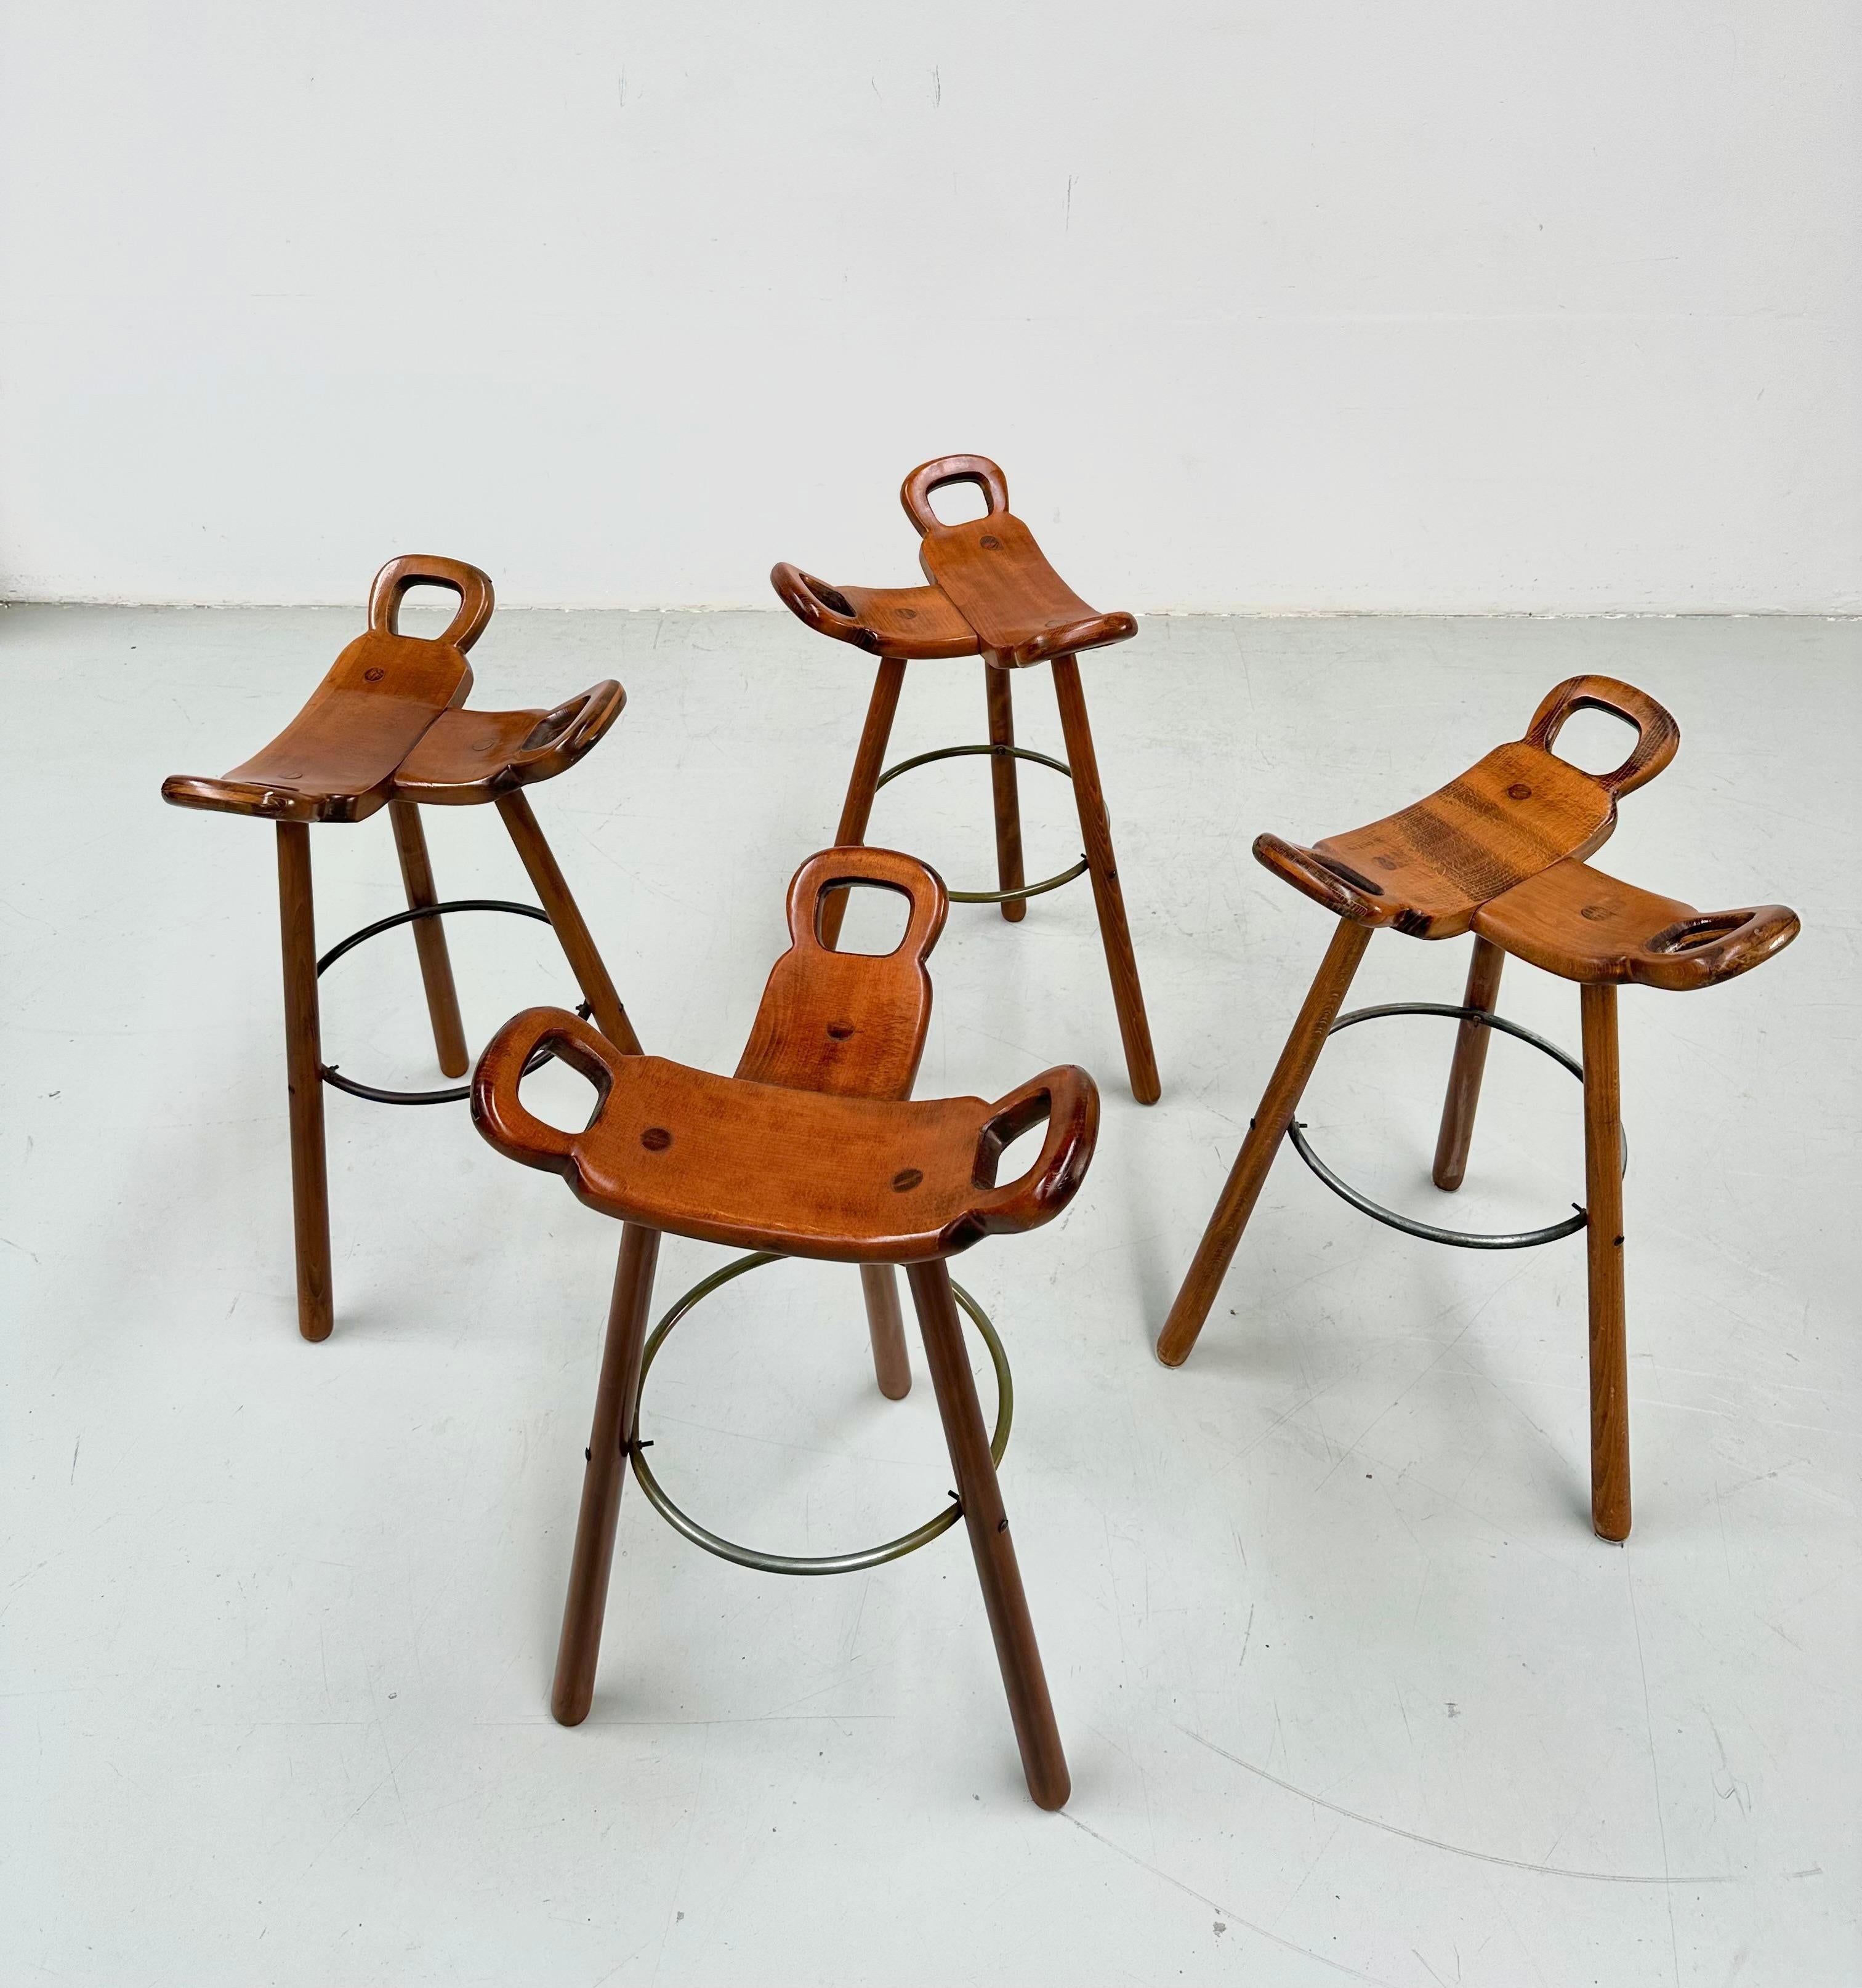 Set of 4 Marbella Brutalist Stools by Sergio Rodrigues for Confonorm 1970s. 4